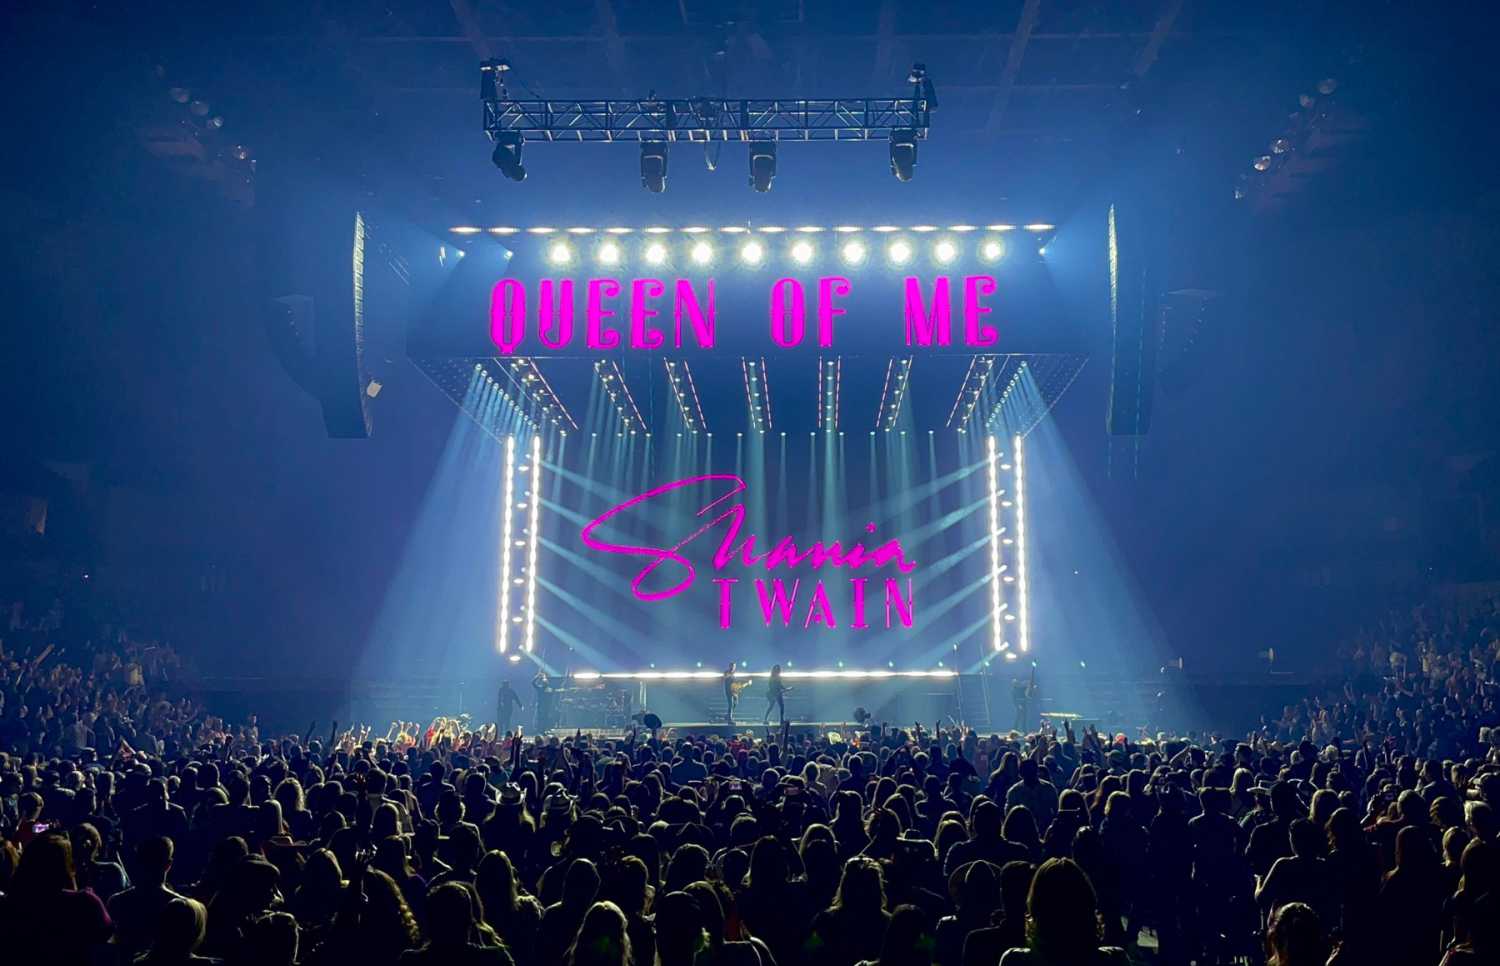 The Queen of Me Tour will play some 80 dates throughout North America, the UK and Ireland this year (photo: Andre Petrus)